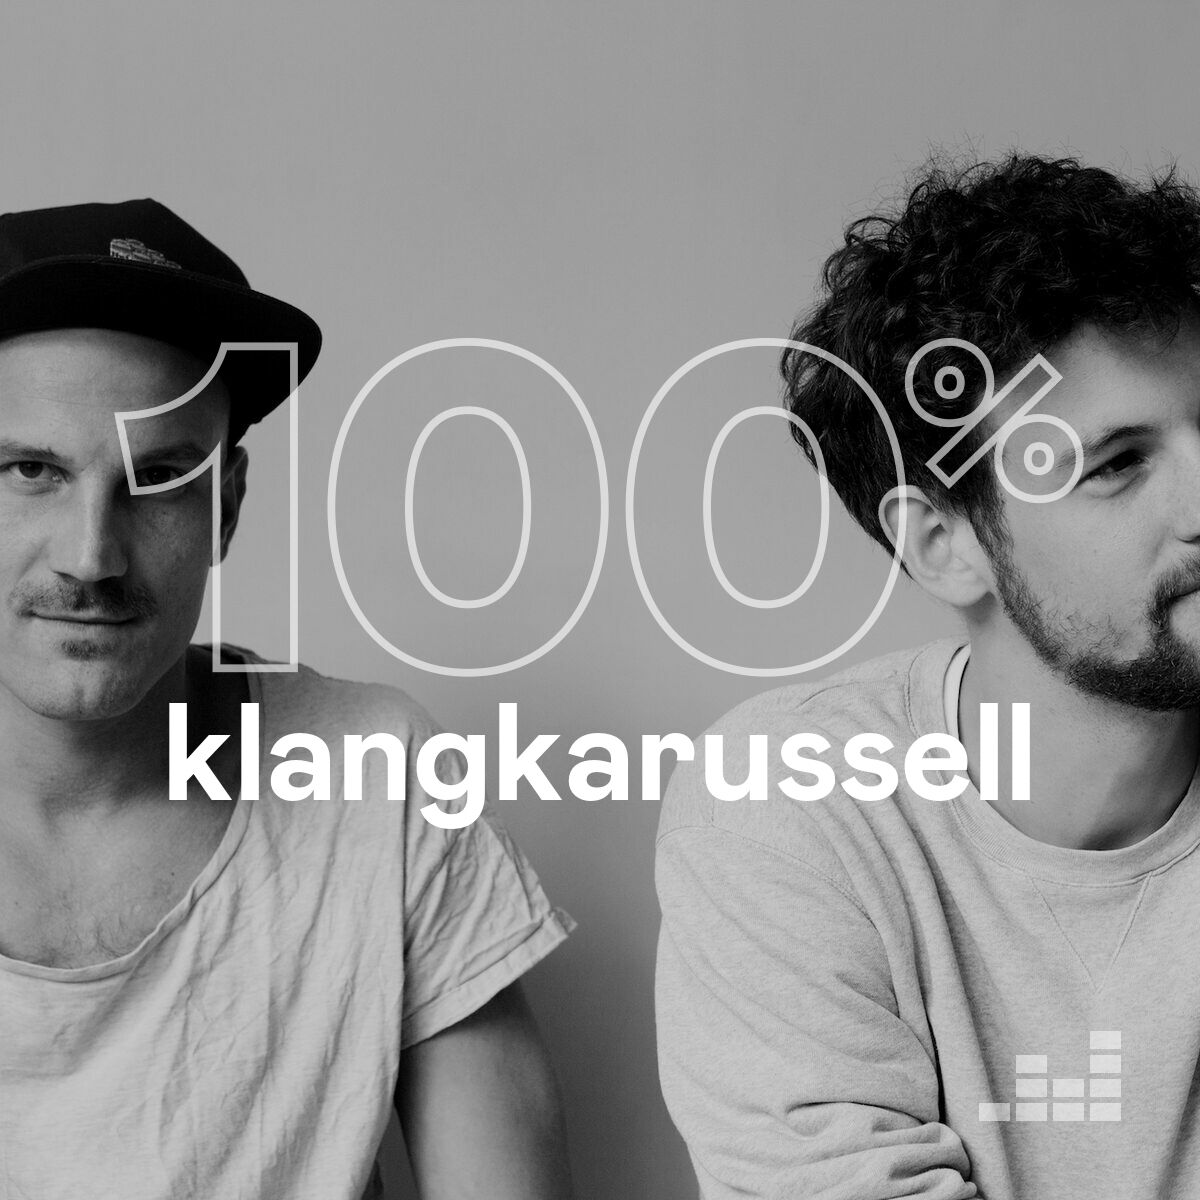 Thank you to @Deezer for creating this 100% Klangkarussell playlist 🙏 deezer.com/fr/playlist/10…